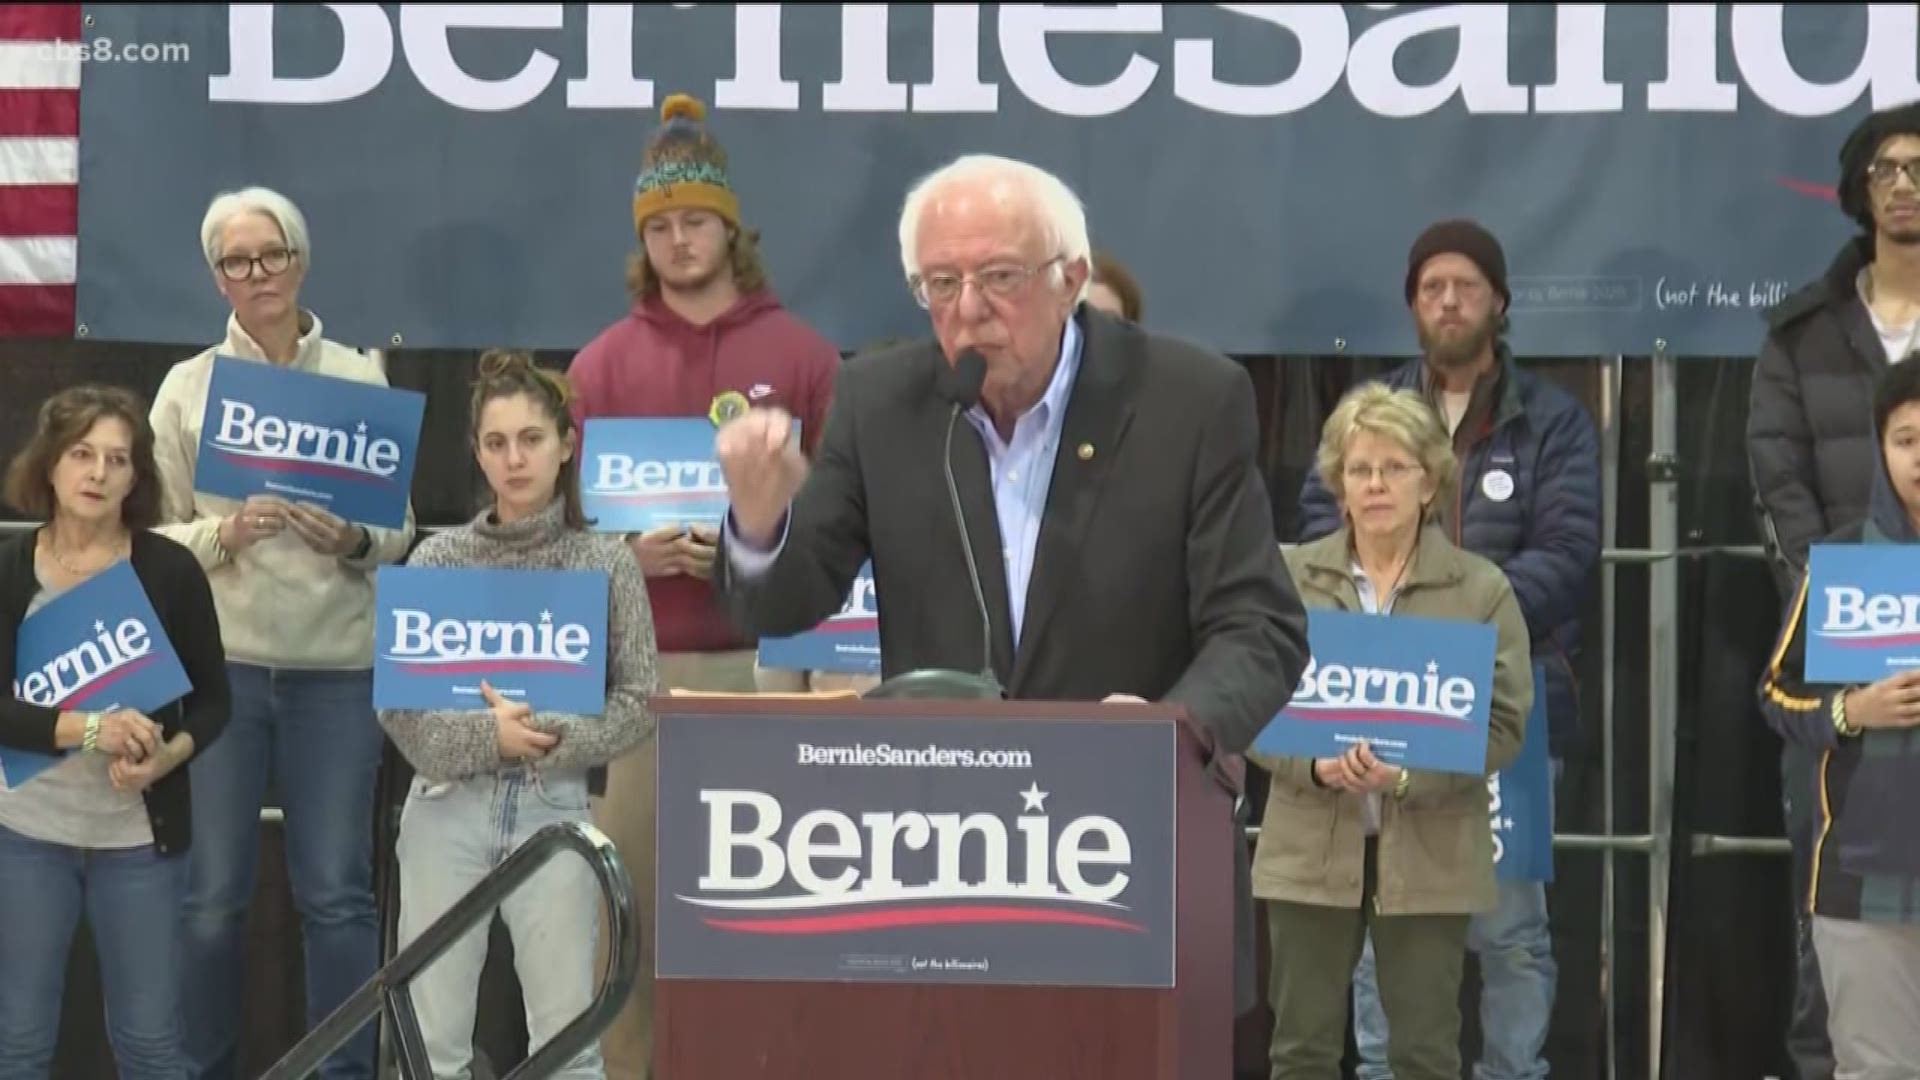 Among the biggest supporters for Bernie Sanders are young voters. News 8's Steve Price reports why Sanders is so popular with younger voters.